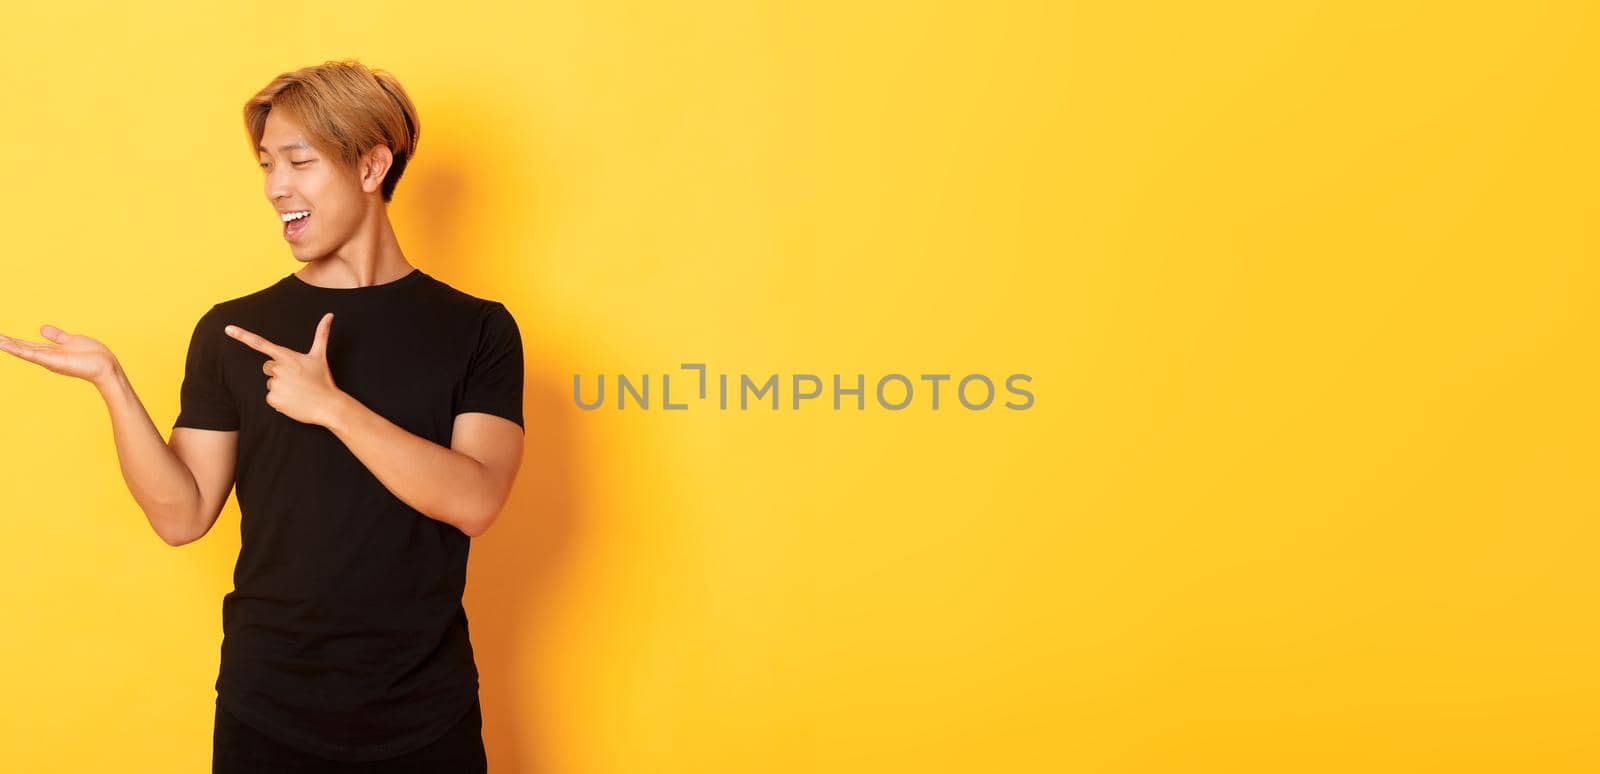 Portrait of handsome smiling asian guy holding something on hand and pointing finger at it, standing yellow background pleased.